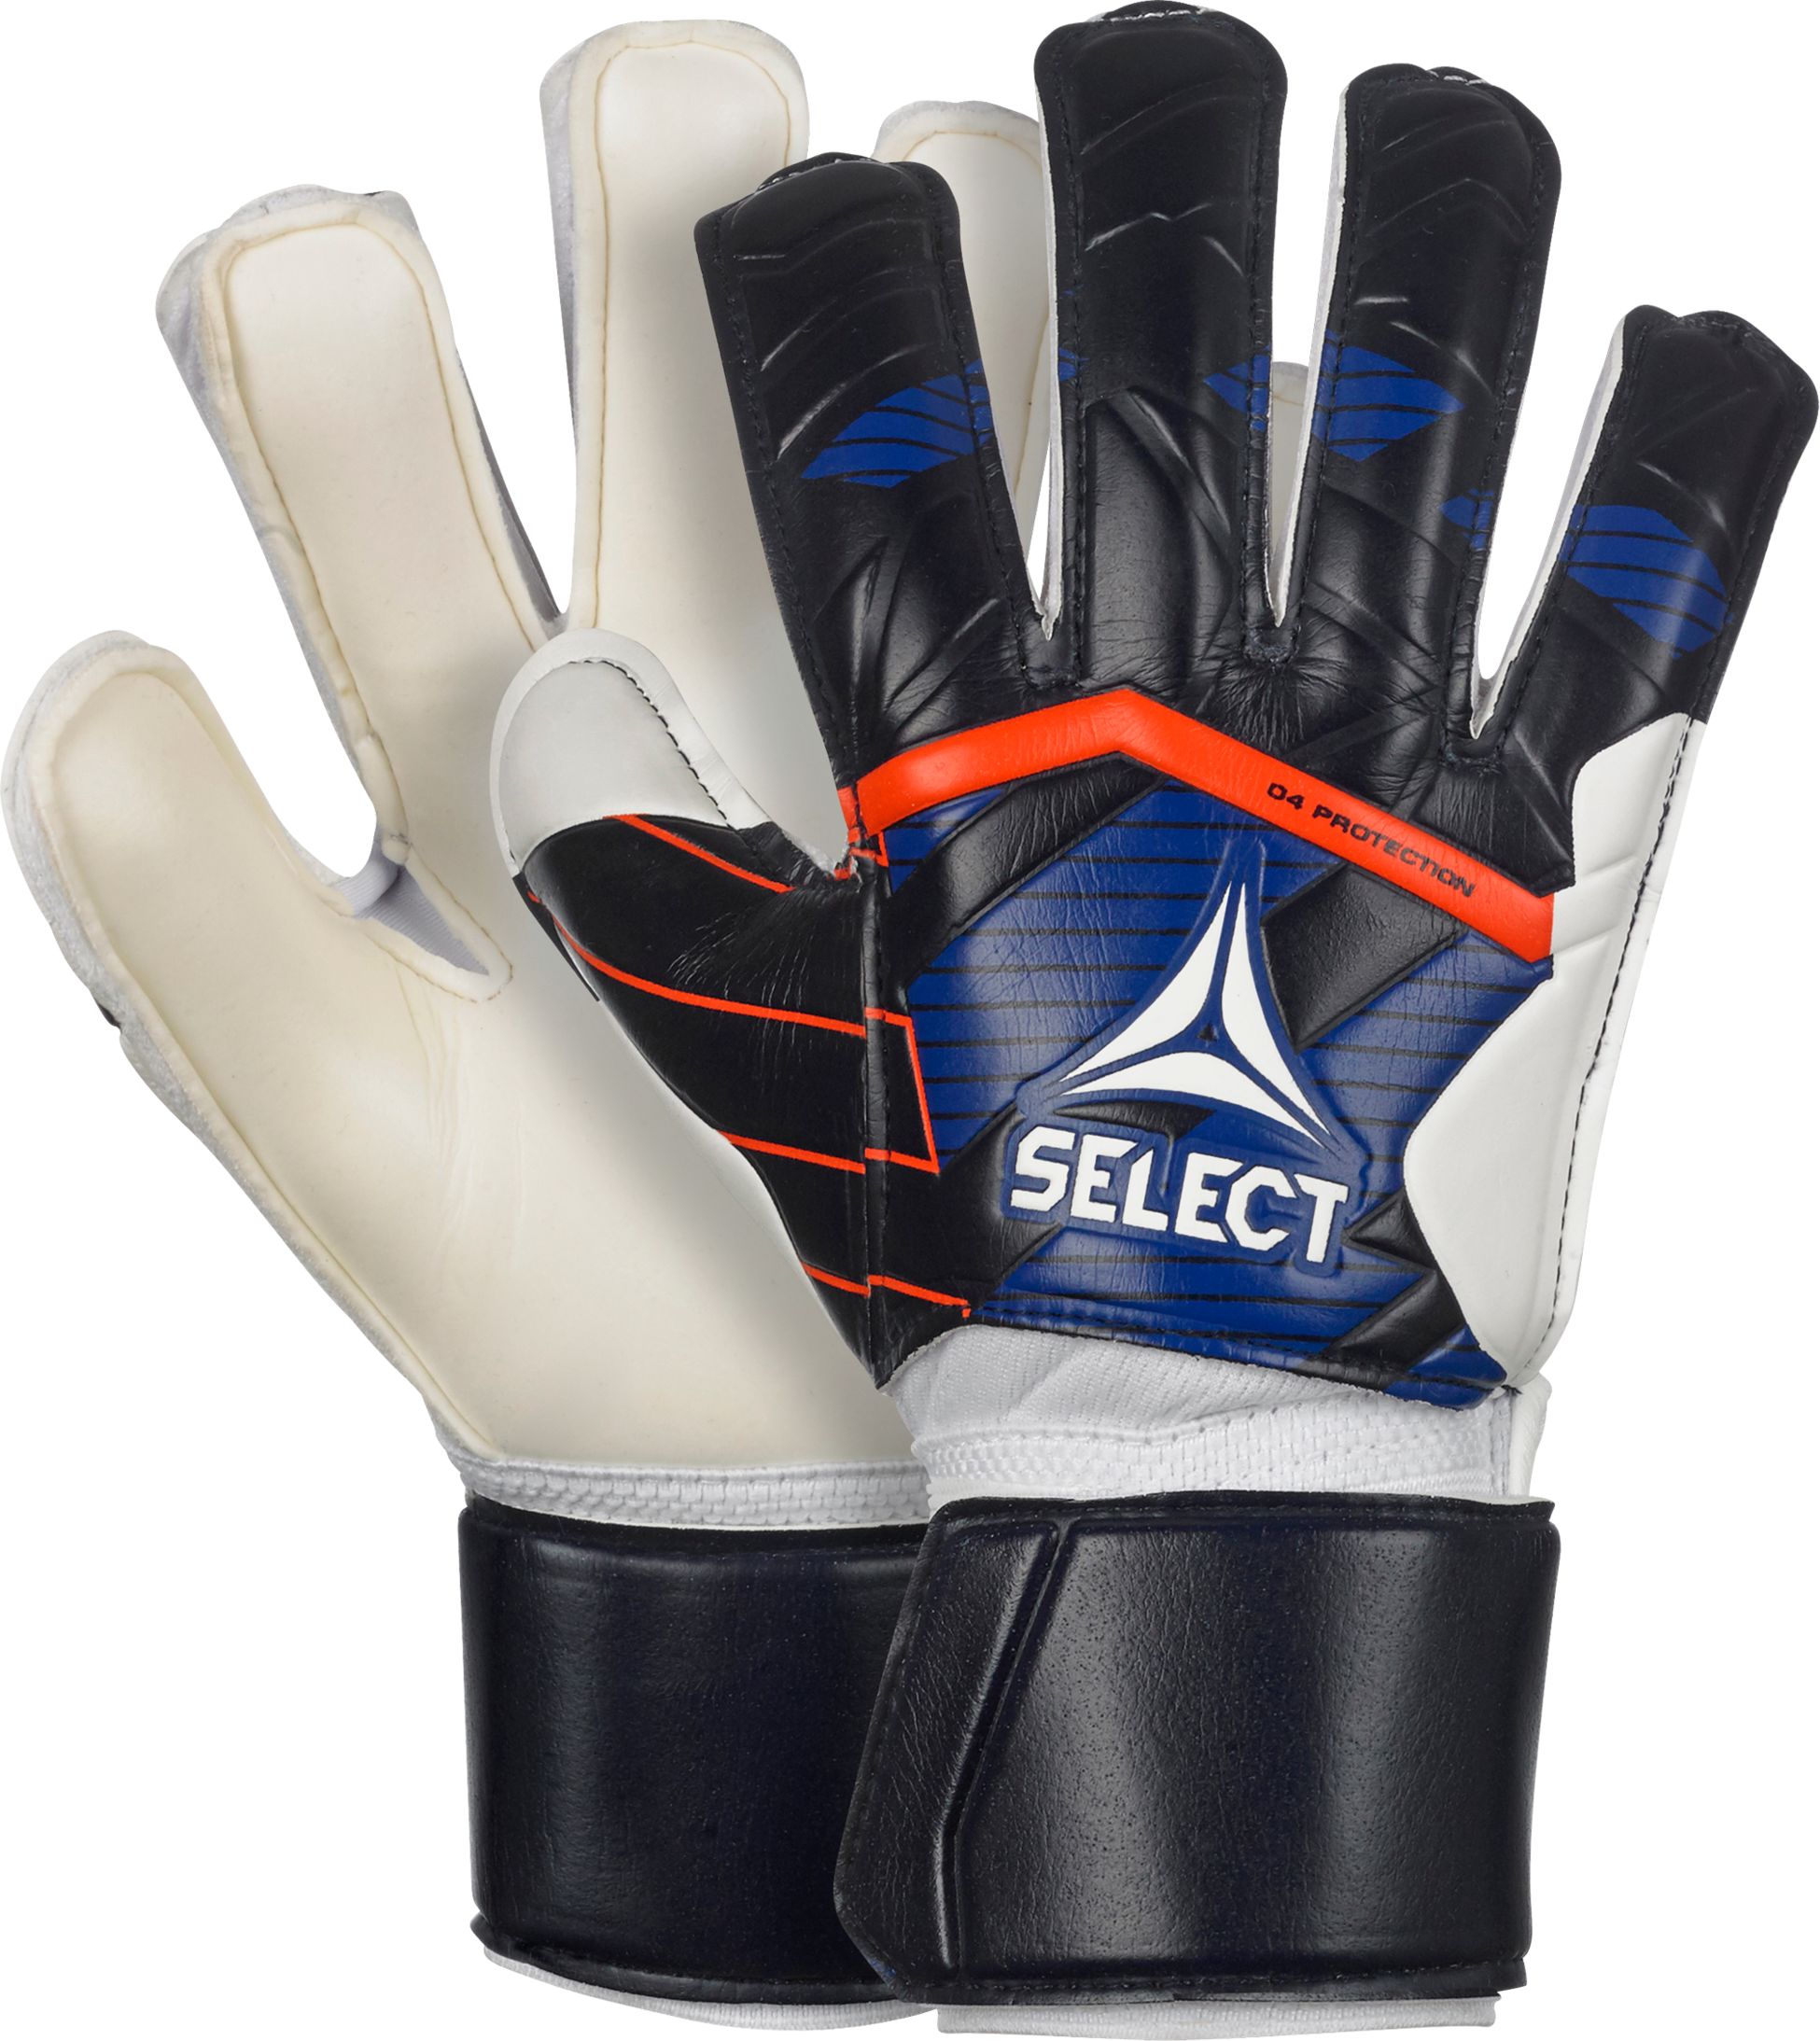 SELECT, 04 PROTECTION GLOVE